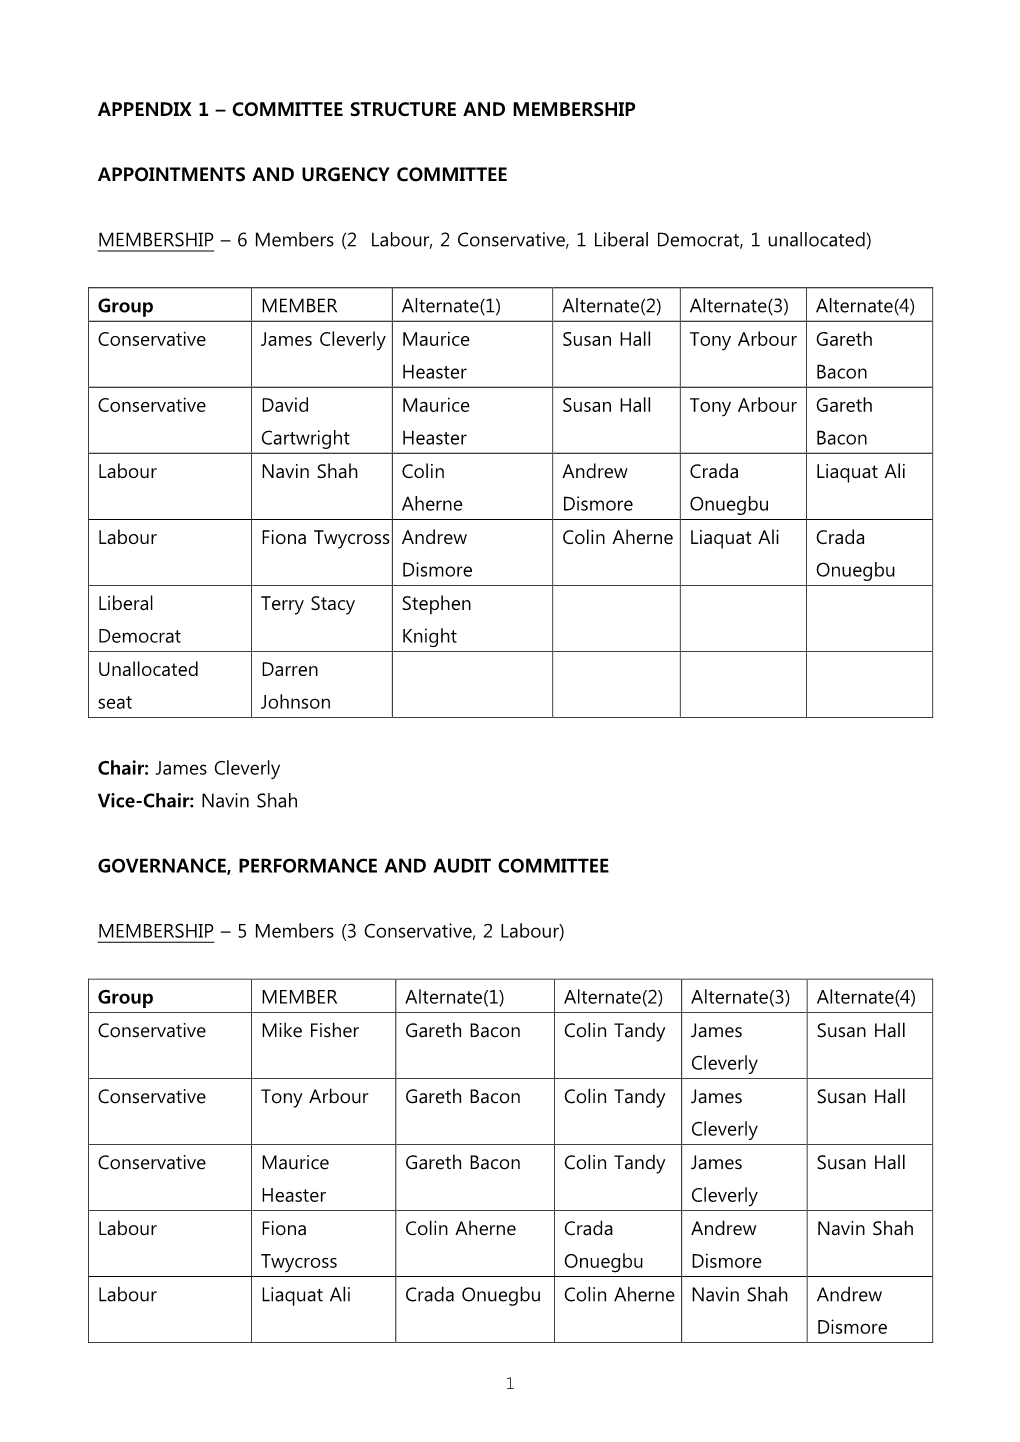 Appendix 1 – Committee Structure and Membership